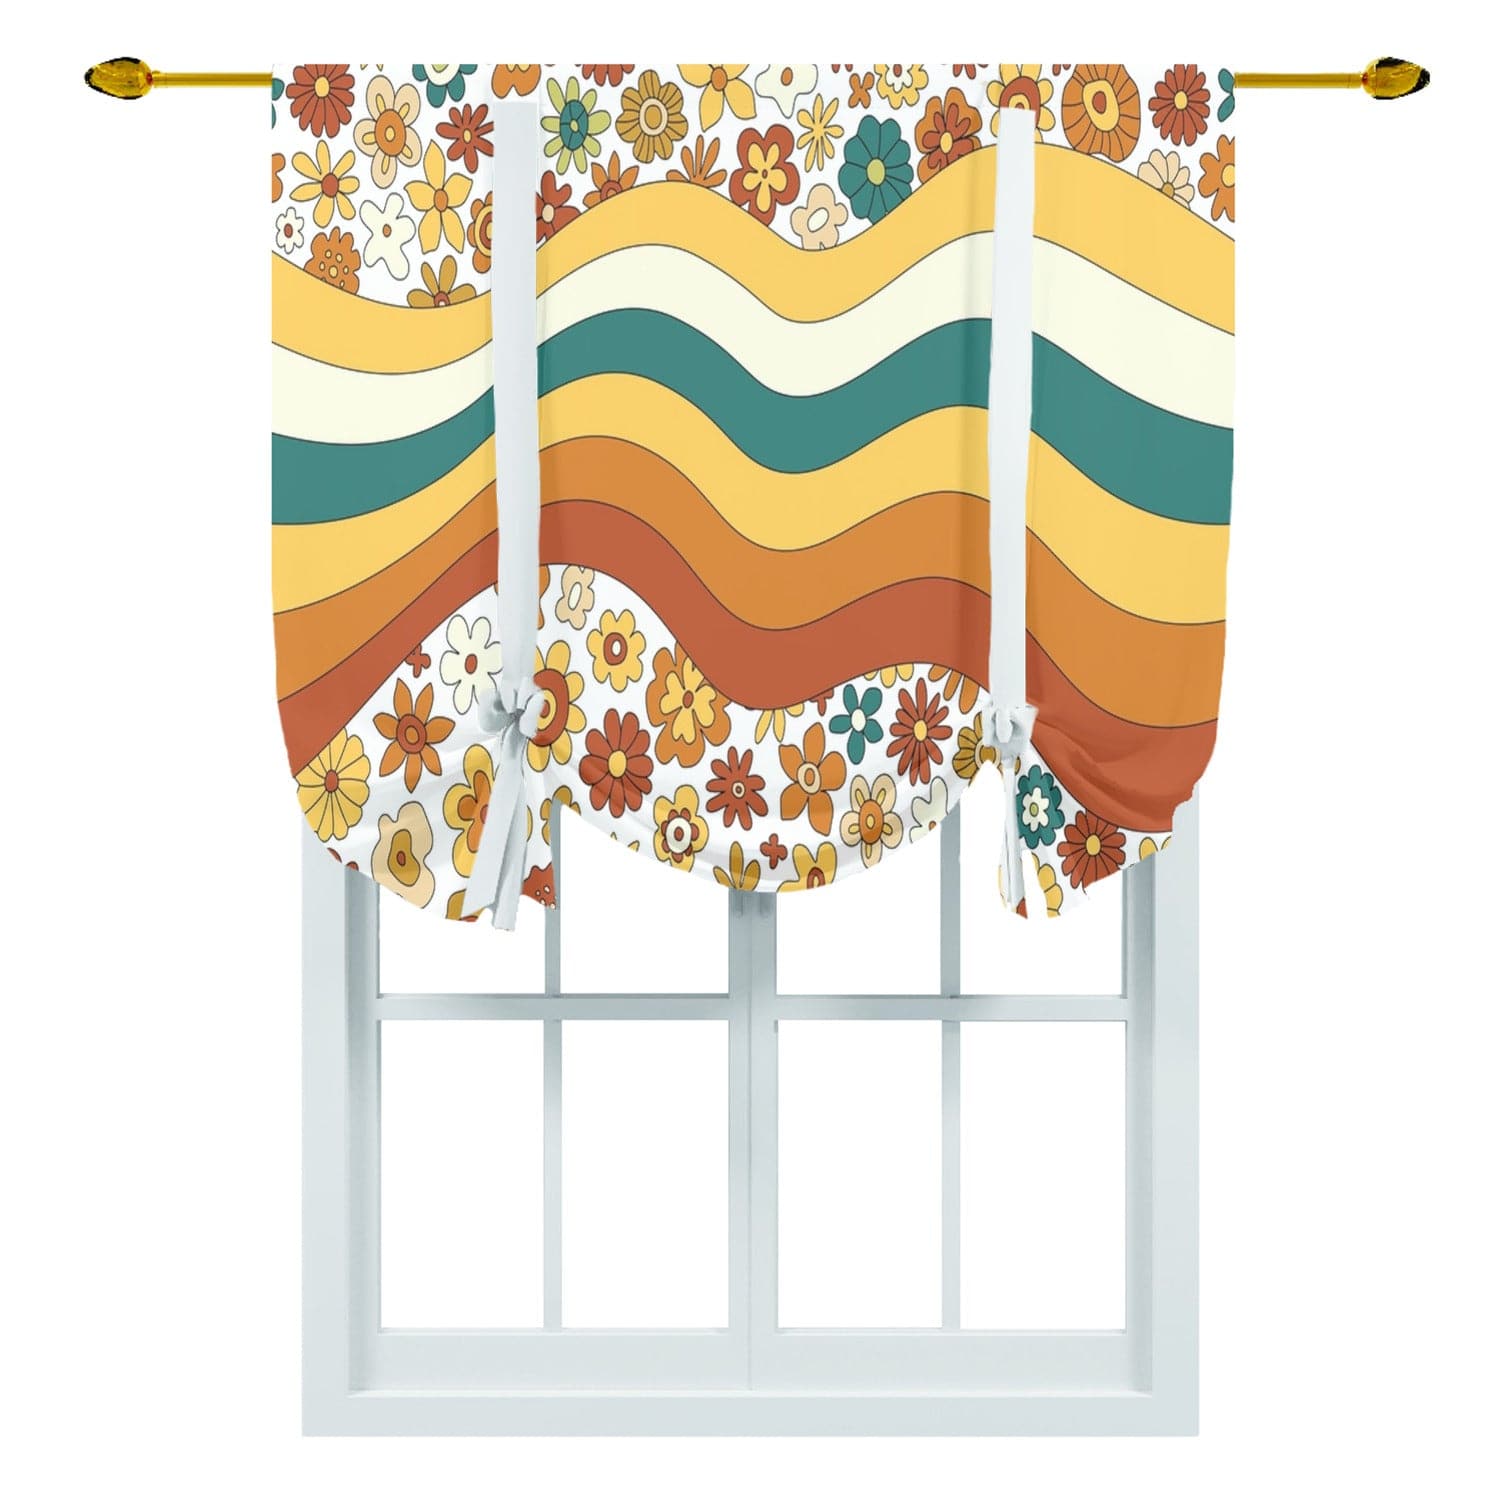 kate-mcenroe-nyc Tie Up Curtain in Mid Century Modern 70s Groovy Hippie Retro Floral Swirl Curtains 55856